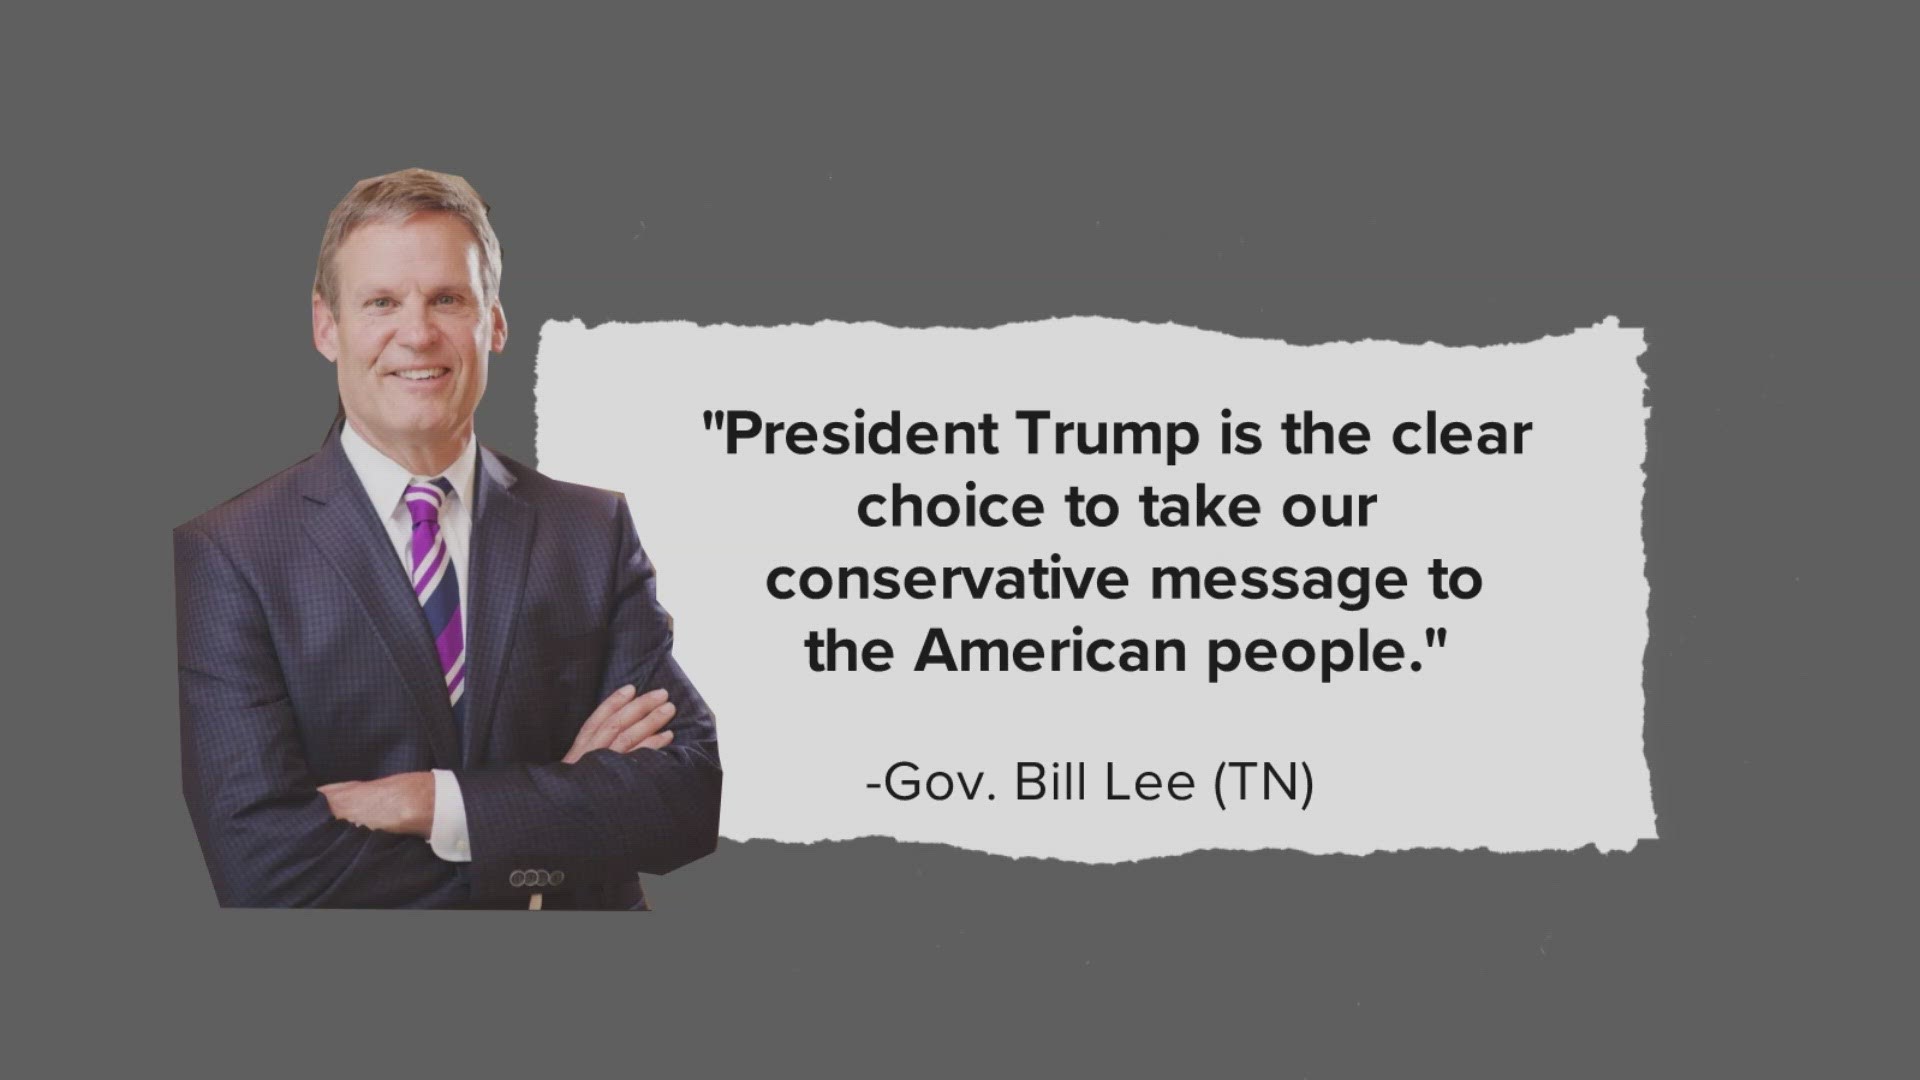 TN governer Bill Lee endorsed Donald Trump after he won the Republican Primary.